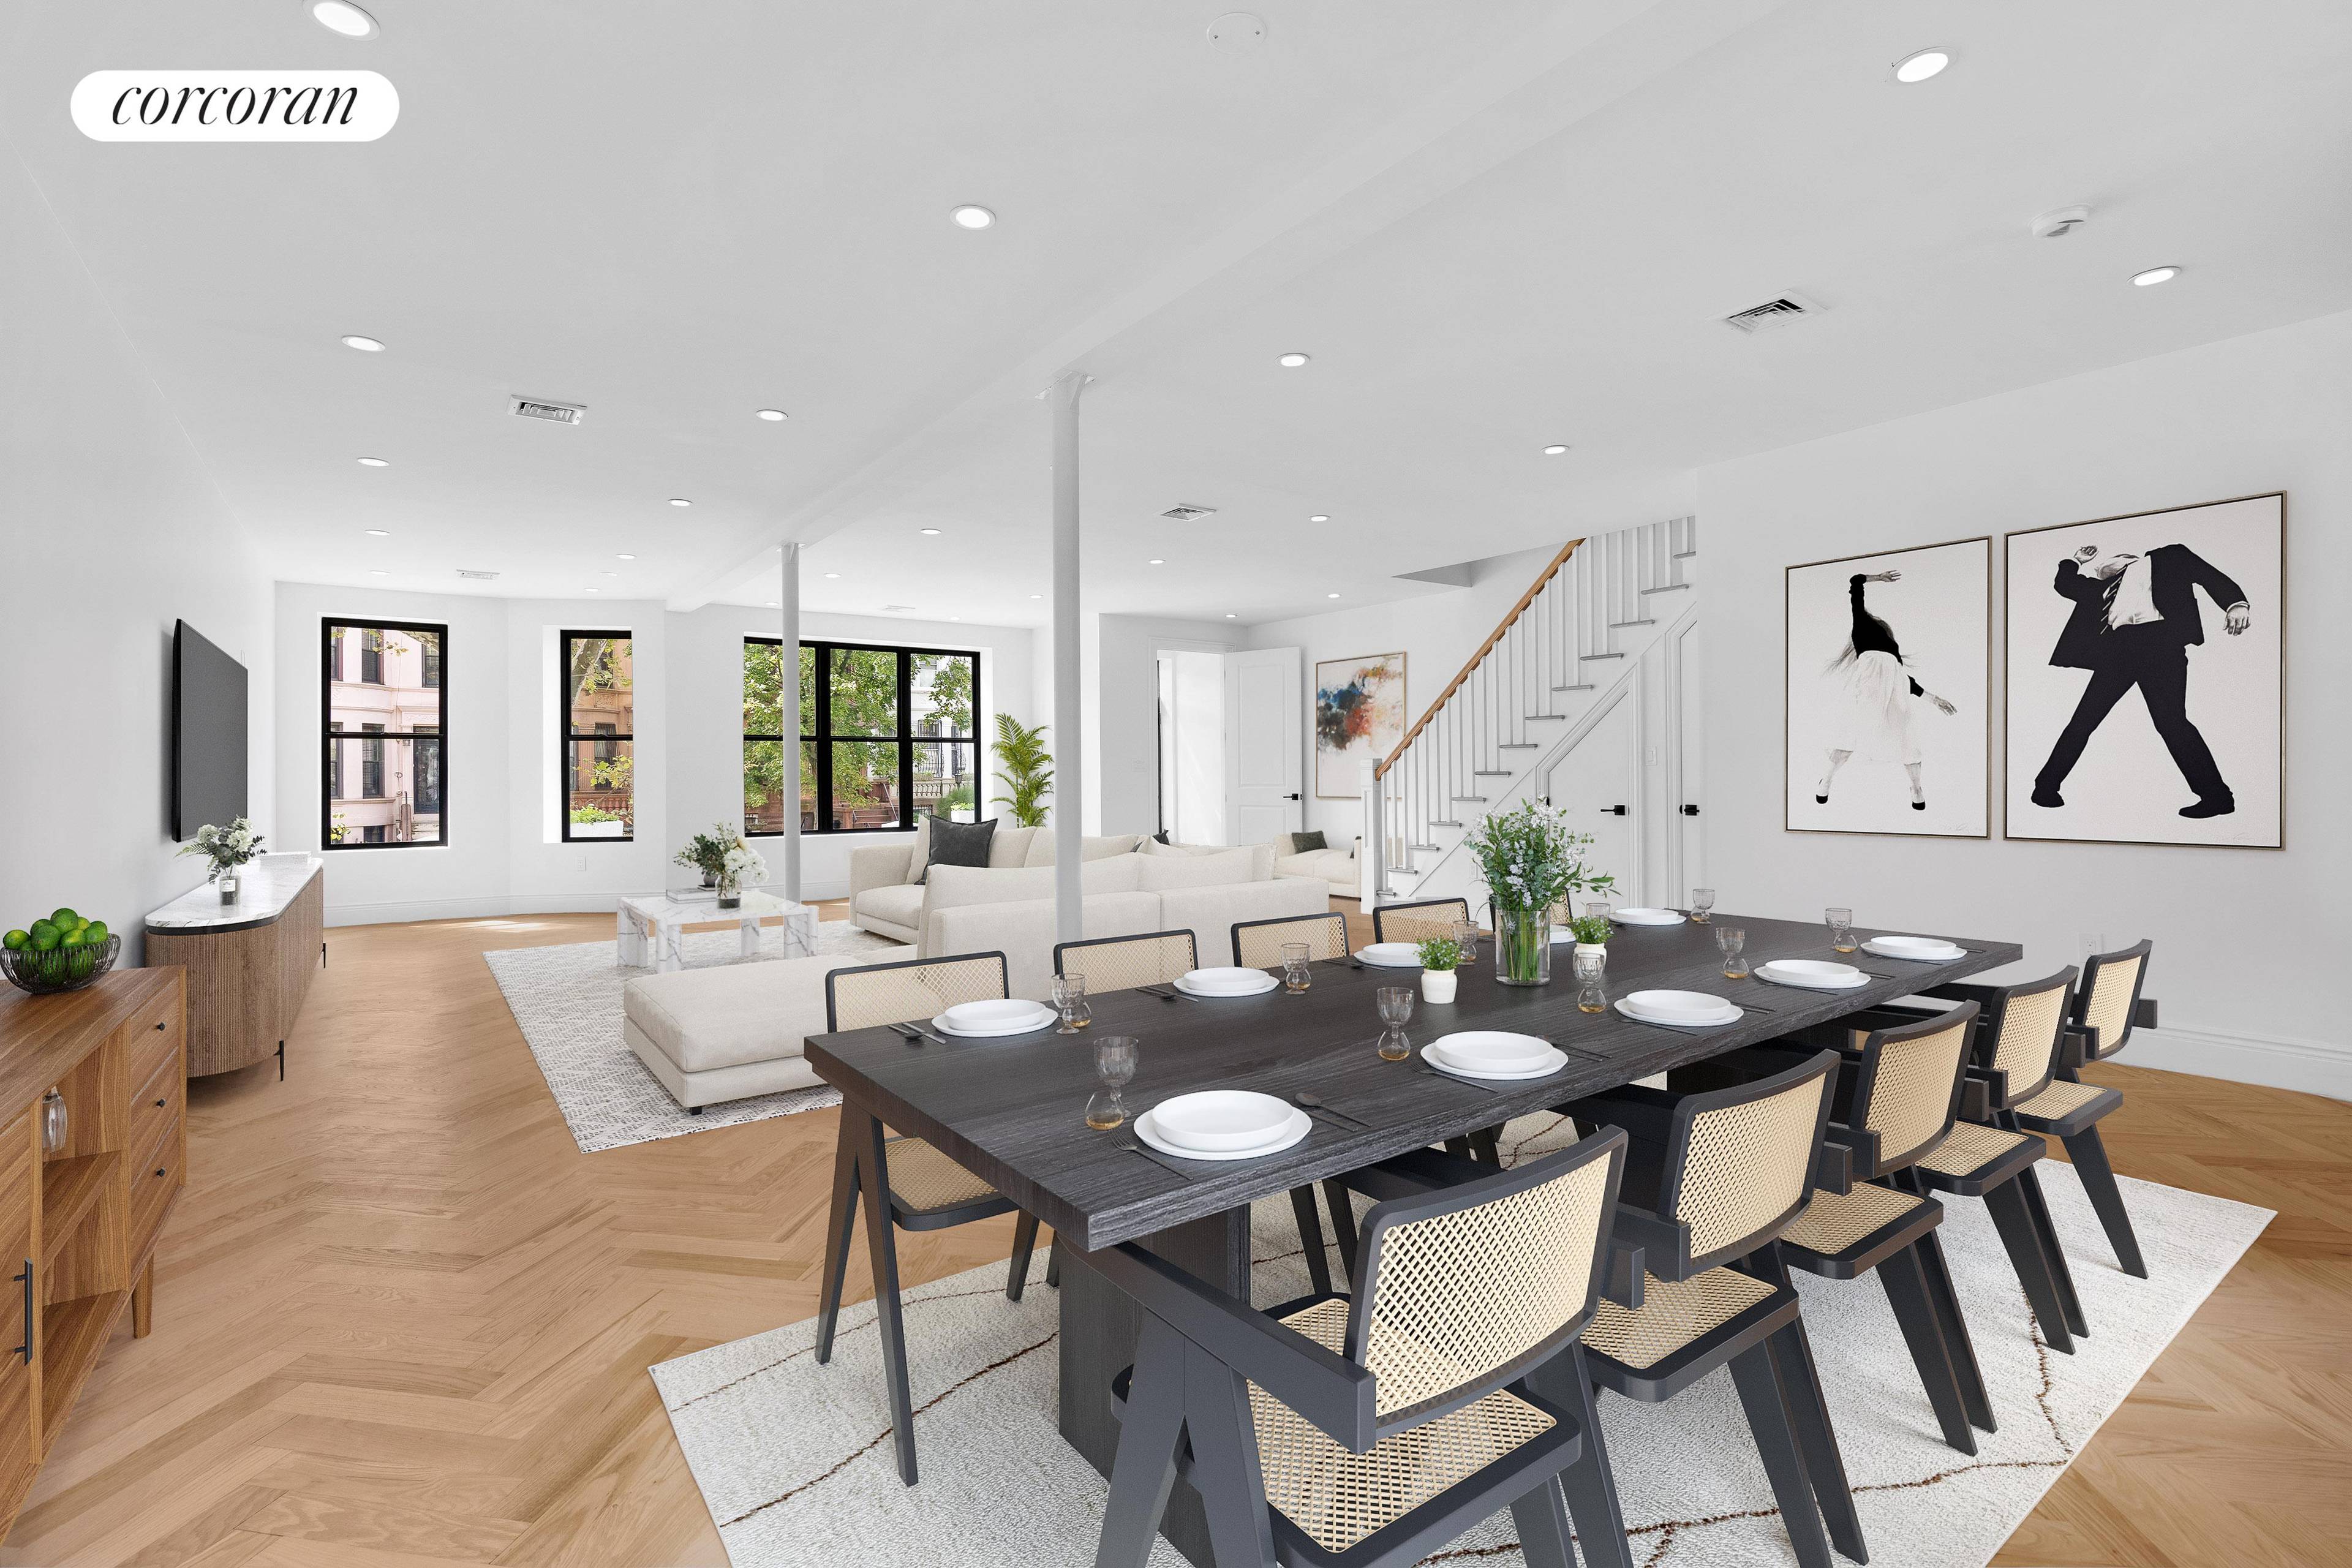 Welcome to 1247 Union Street, a brilliantly reimagined vision of Brooklyn living on a prime Crown Heights block that melds art, style and function into a perfect two family home ...